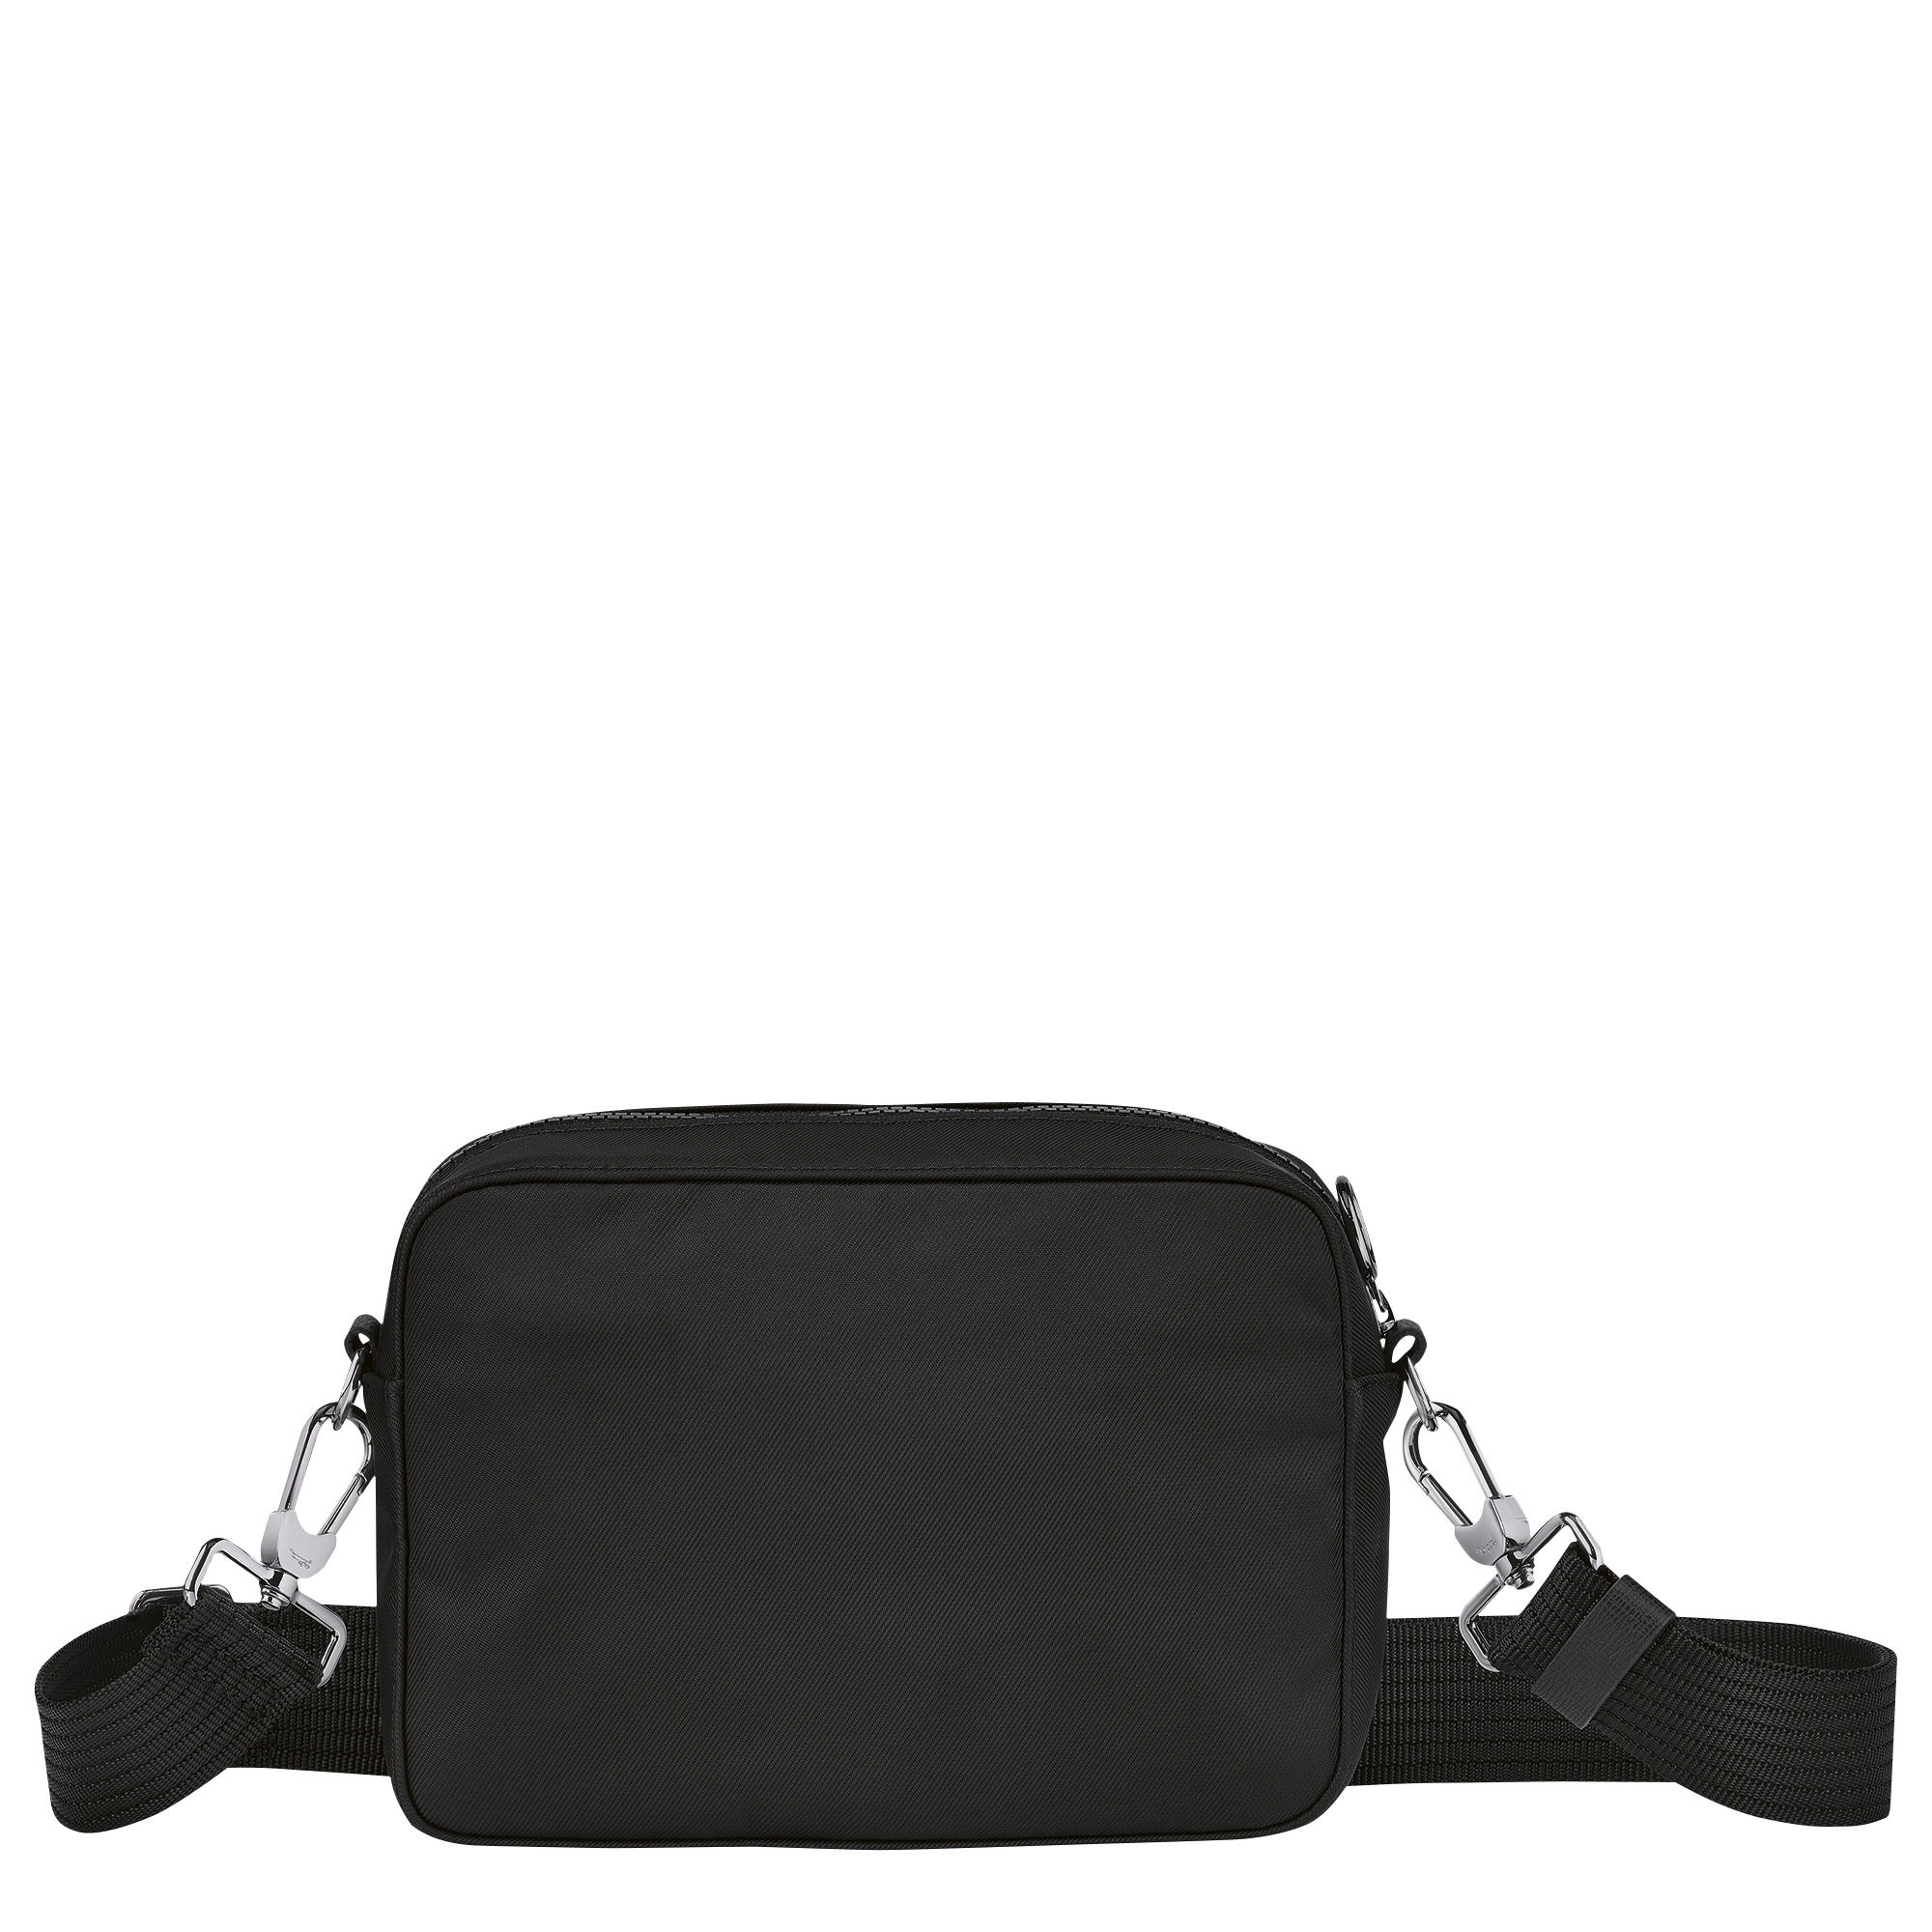 Le Pliage Energy S Camera bag Black - Recycled canvas - 4